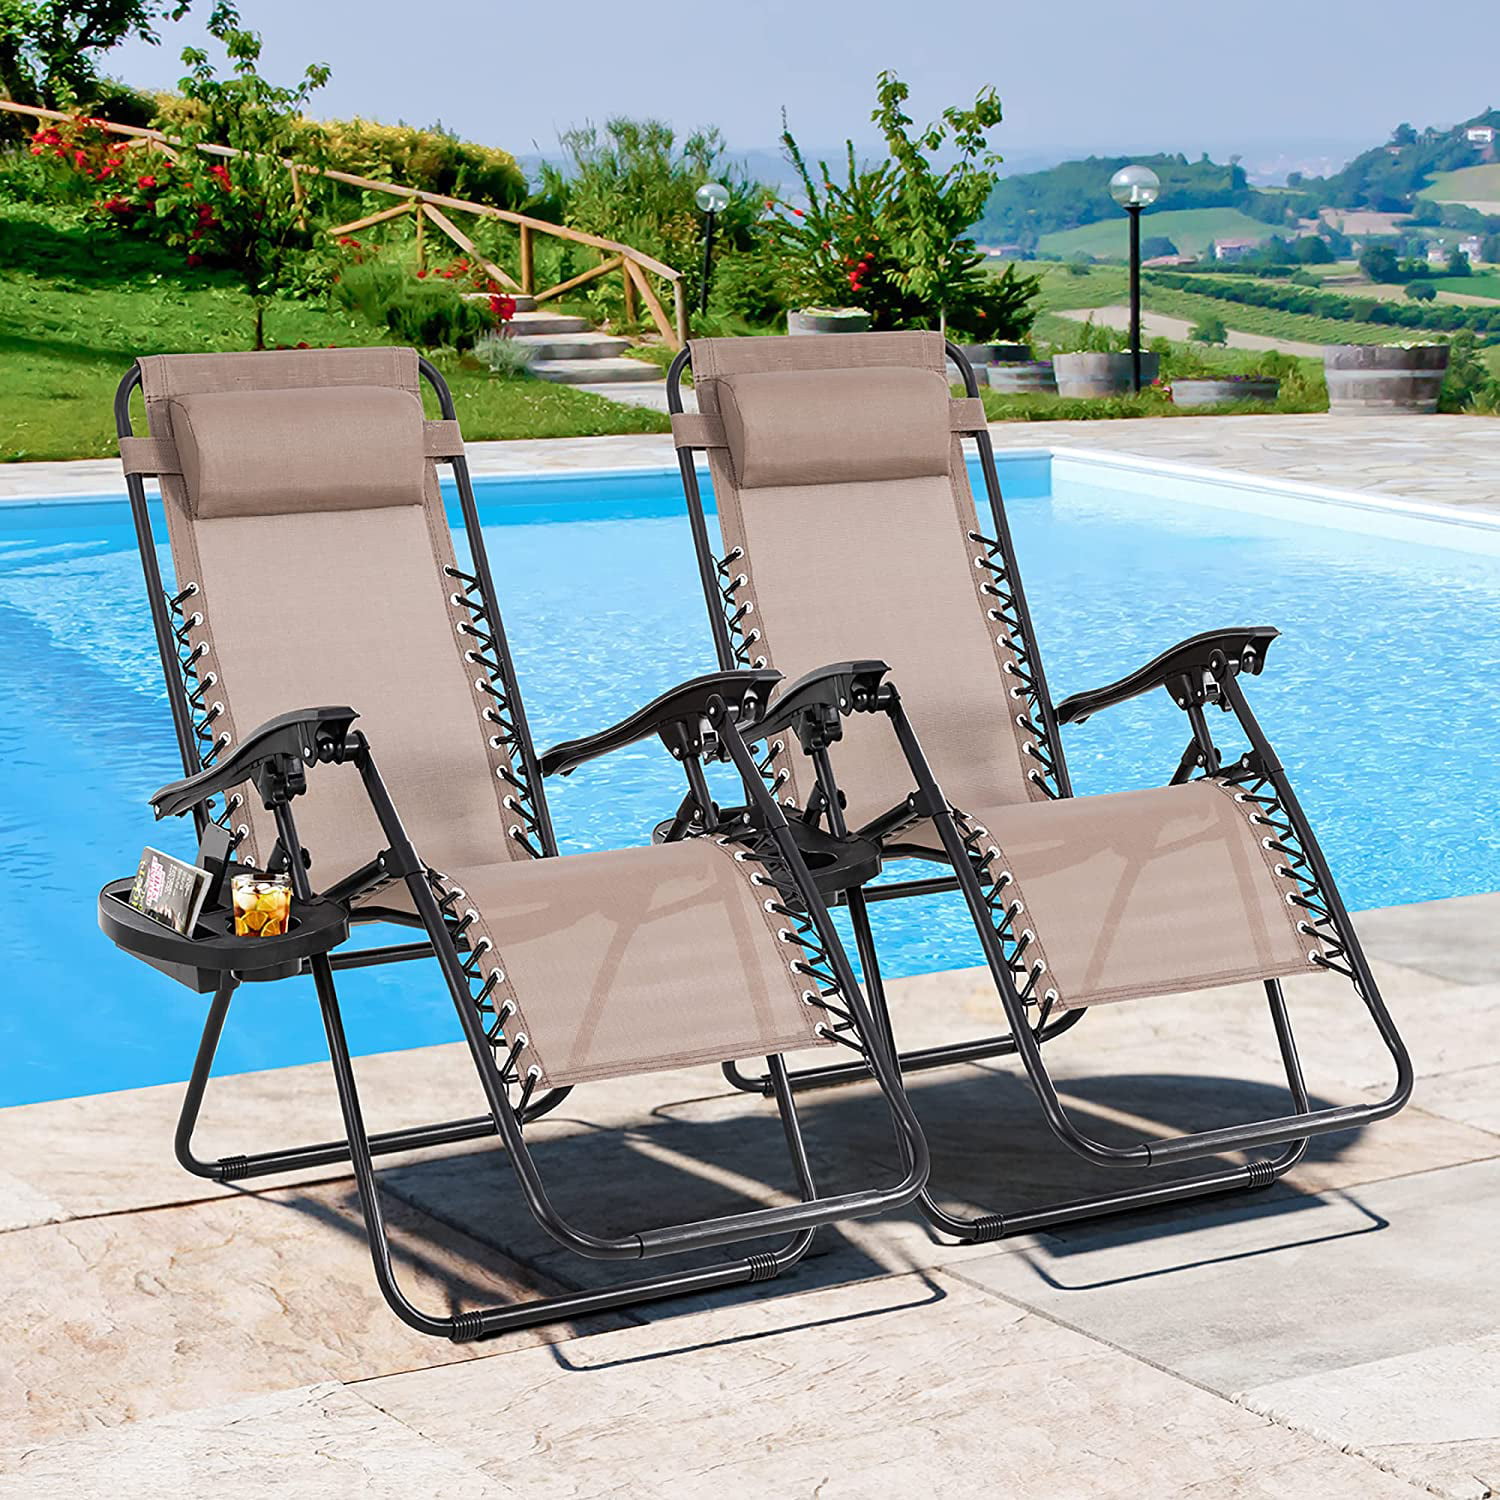 Devoko Patio Zero Gravity Chair Outdoor Free Folding Adjustable Chaise Lounge Chairs Beach Pool Side Using Reclining with Pillow and Tray Holder Set of 2 Blue 